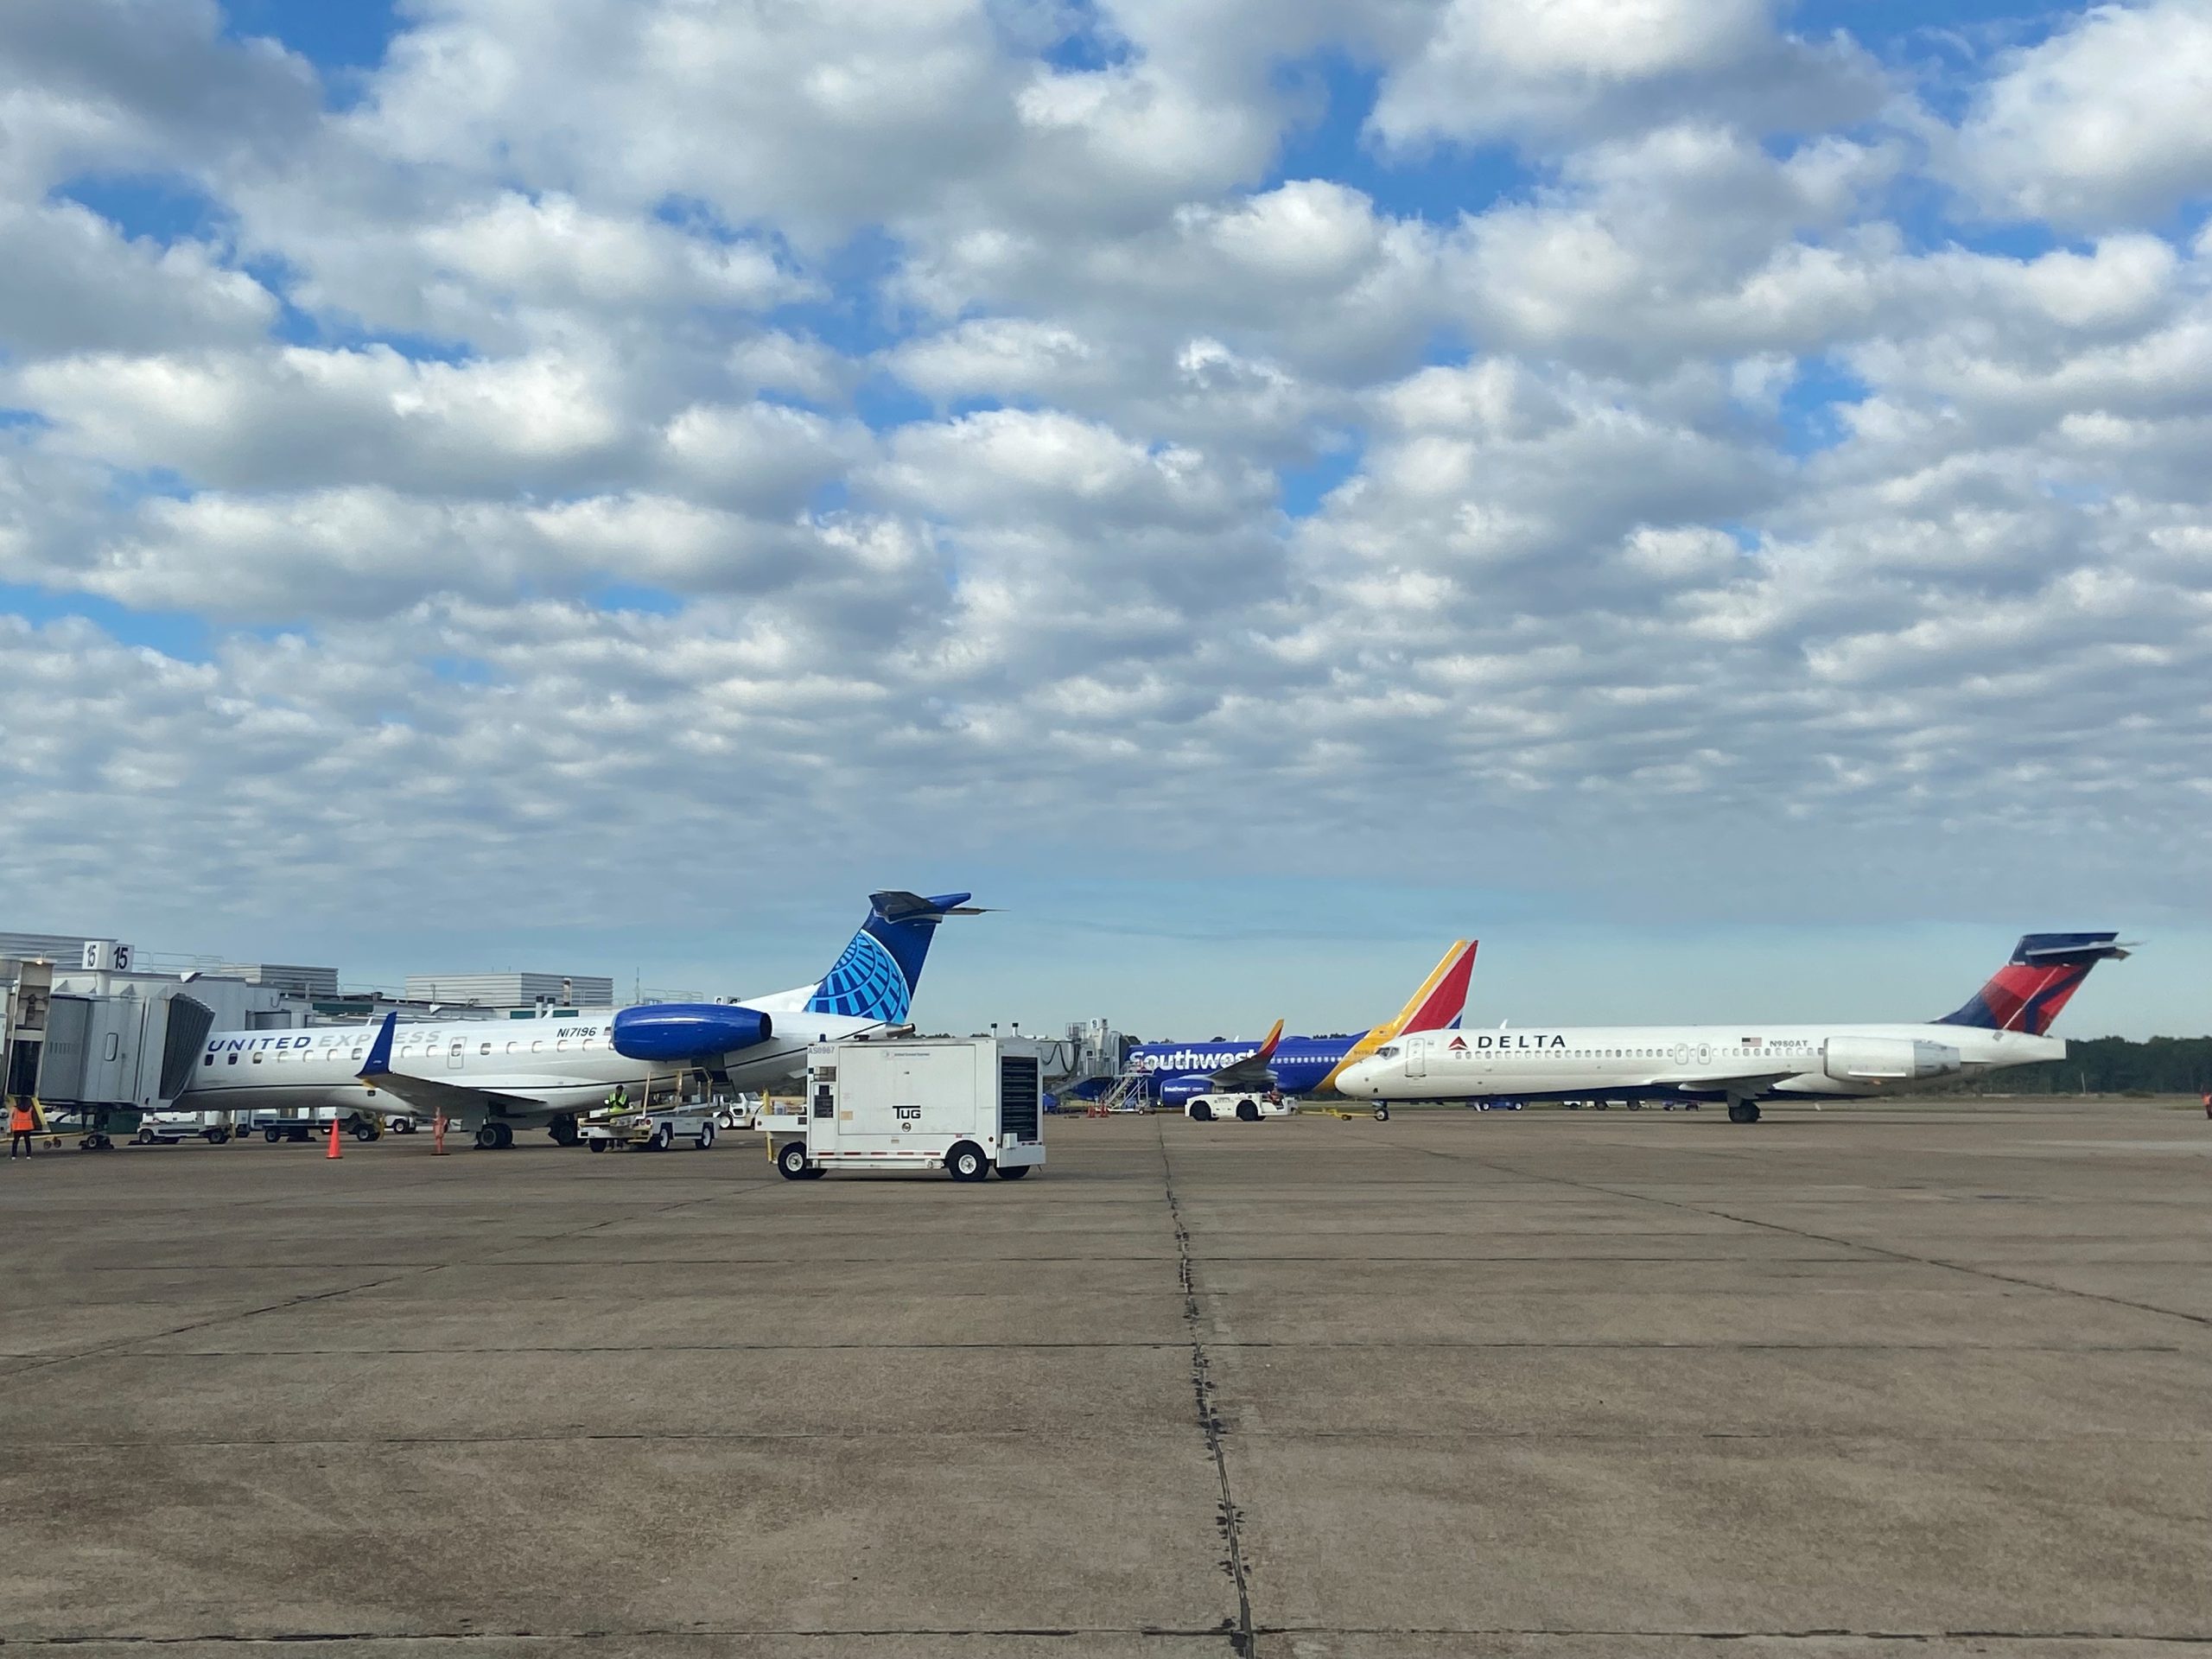 Jackson Municipal Airport Authority Announces 10-year High Passenger Numbers, Numerous Major Projects at Jackson-Medgar Wiley Evers International Airport